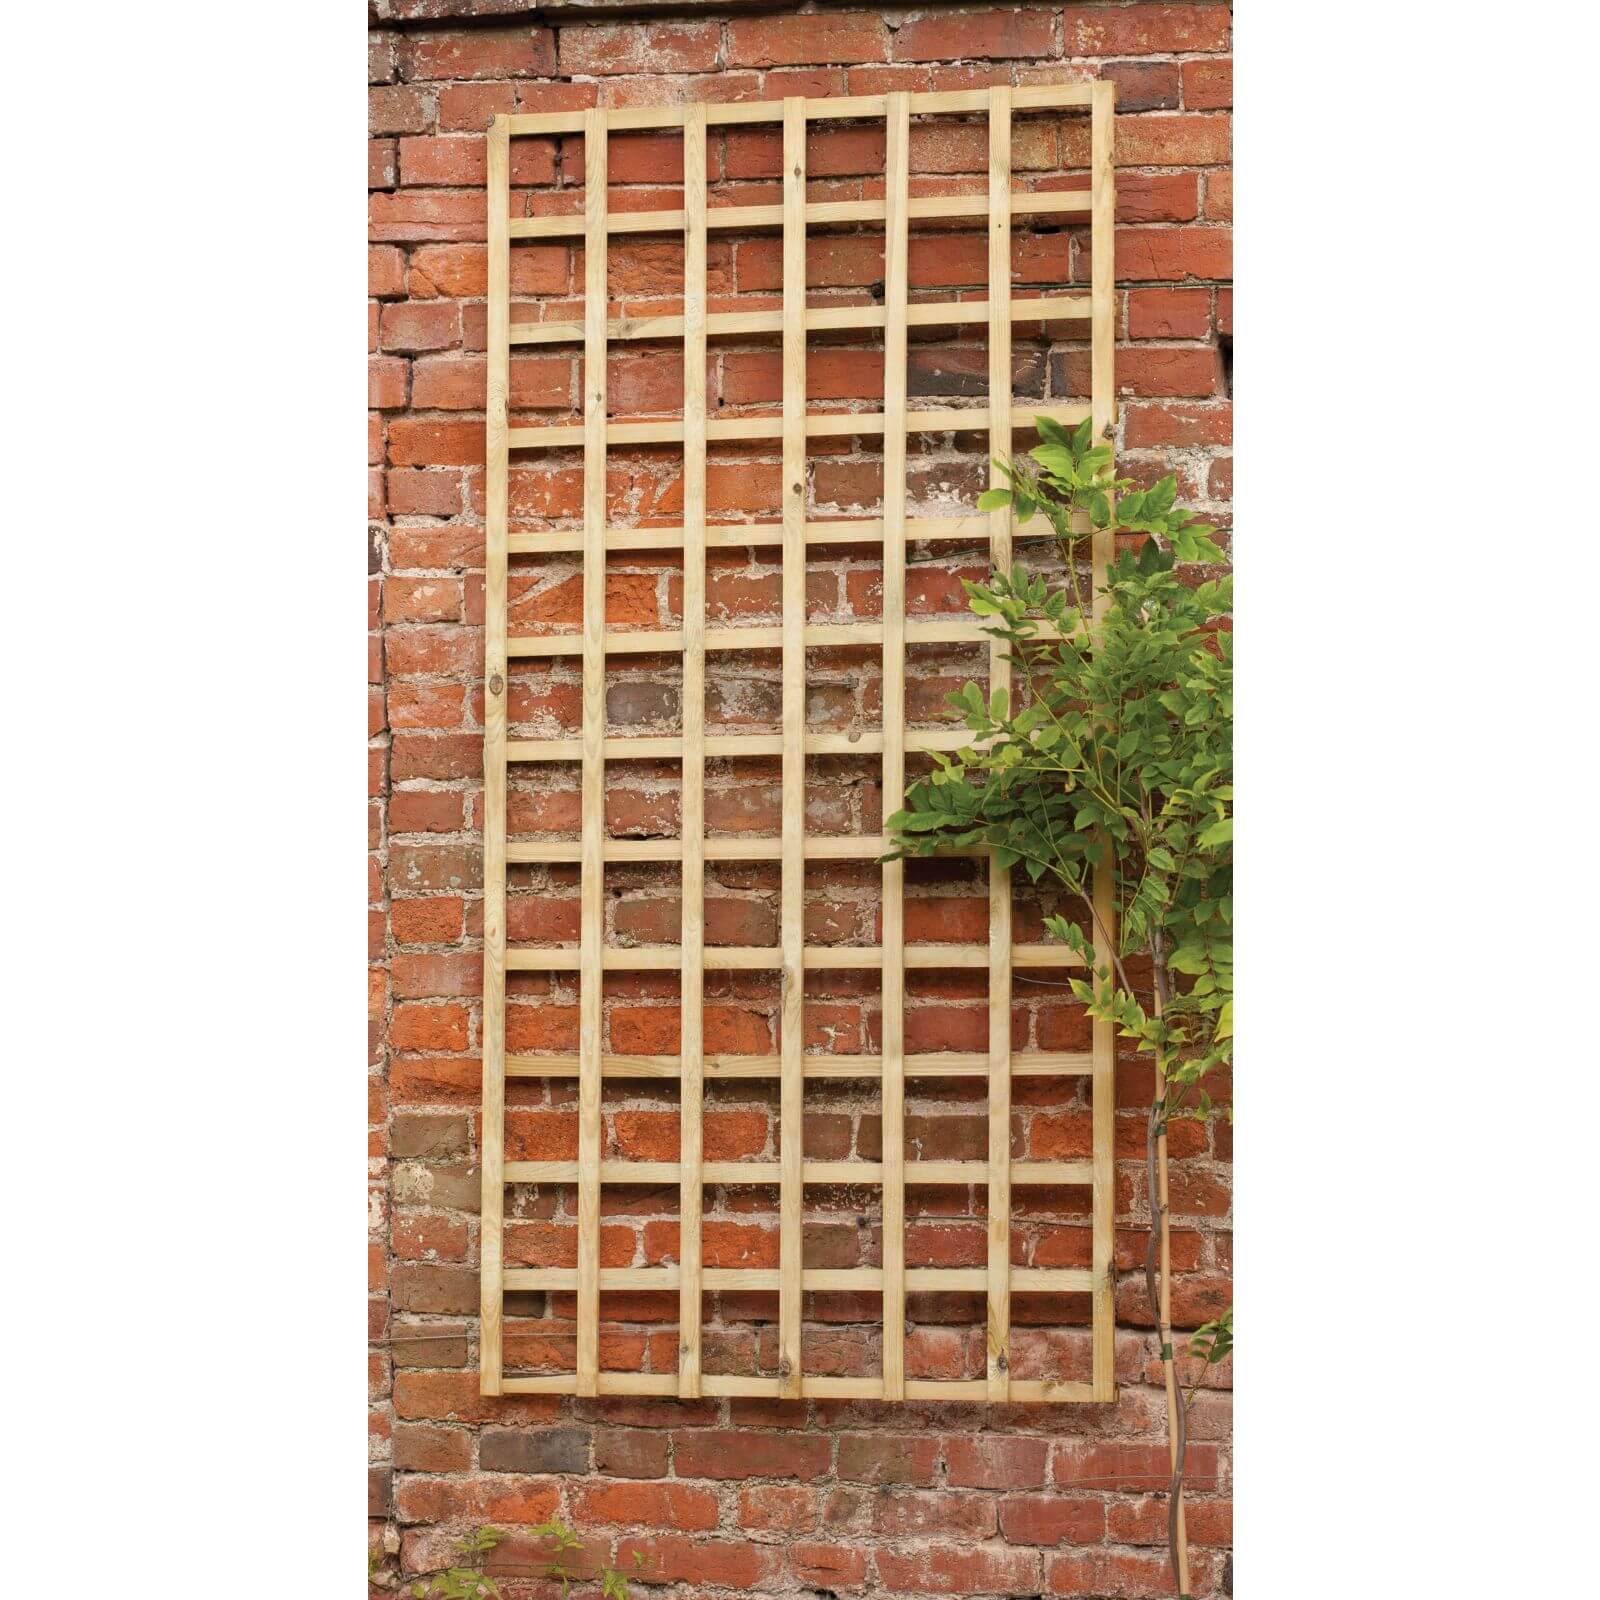 Forest Traditional Trellis - 180 x 90cm